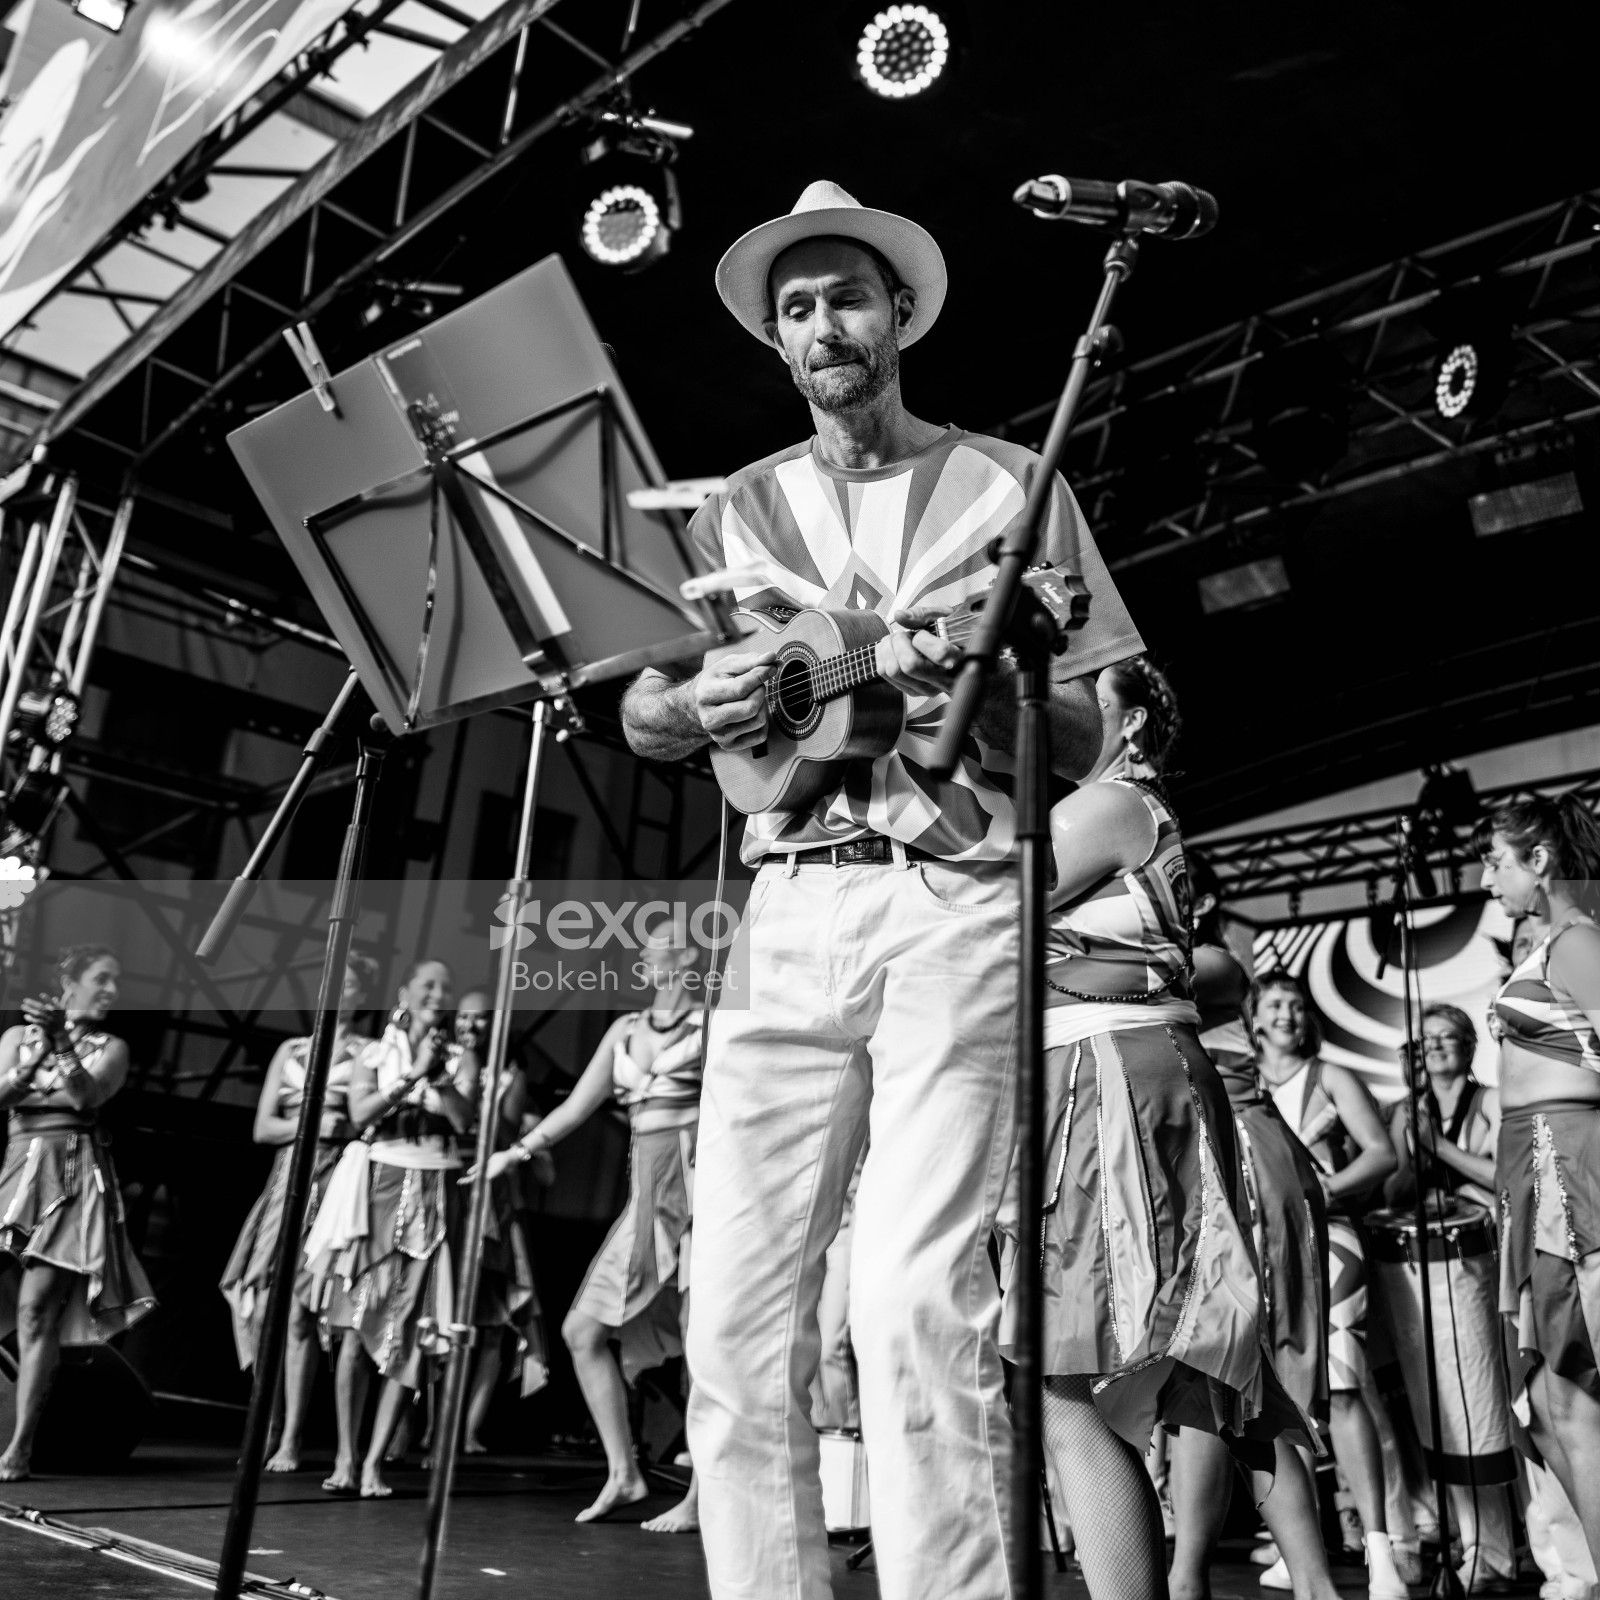 Dance performers and a man play ukulele on stage at Cuba Dupa 2021 B&W